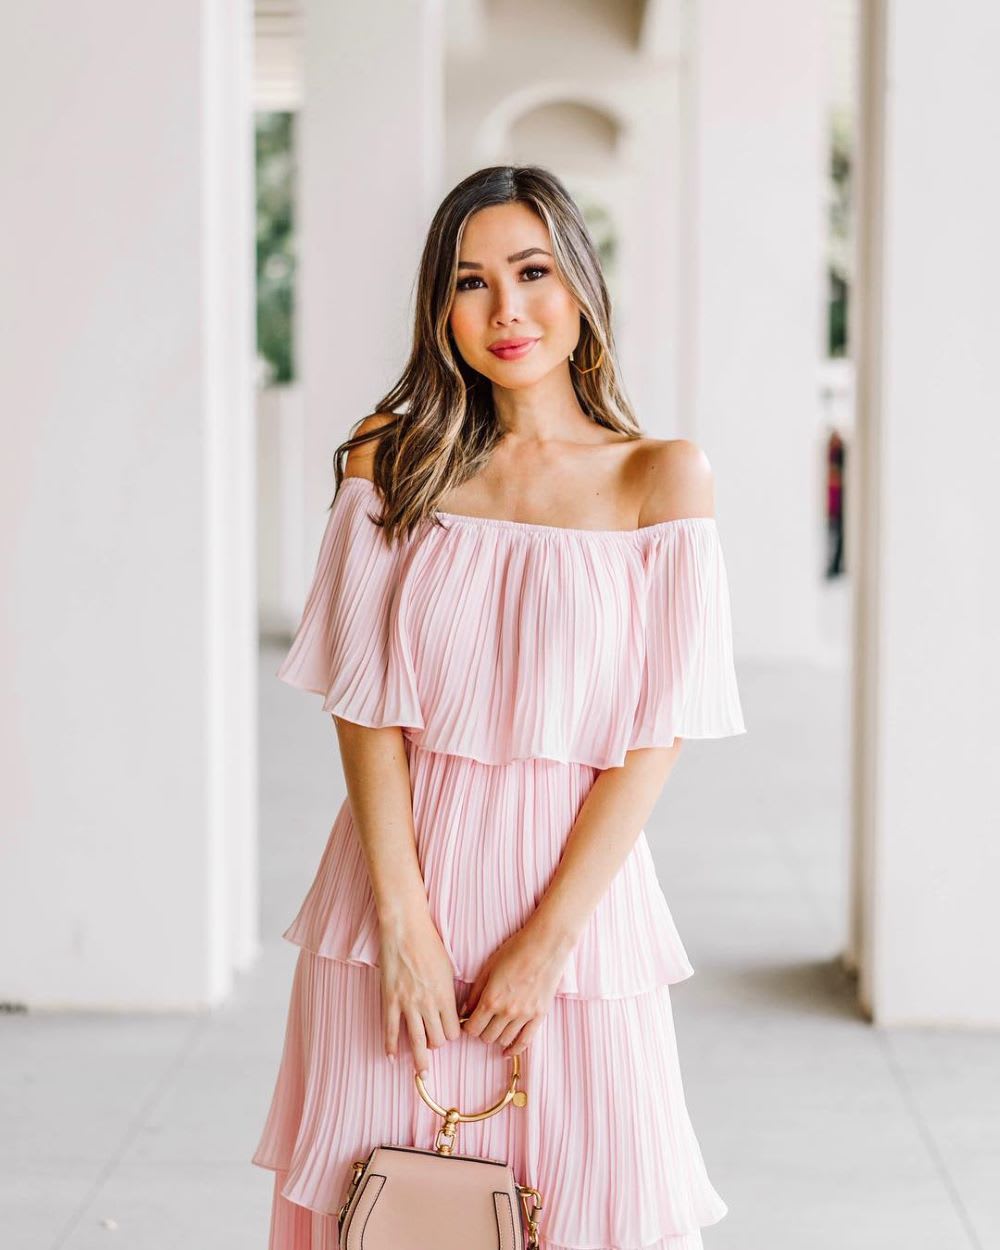 Dresses For Beach Weddings: The Complete Guest Guide - Lulus.com Fashion  Blog